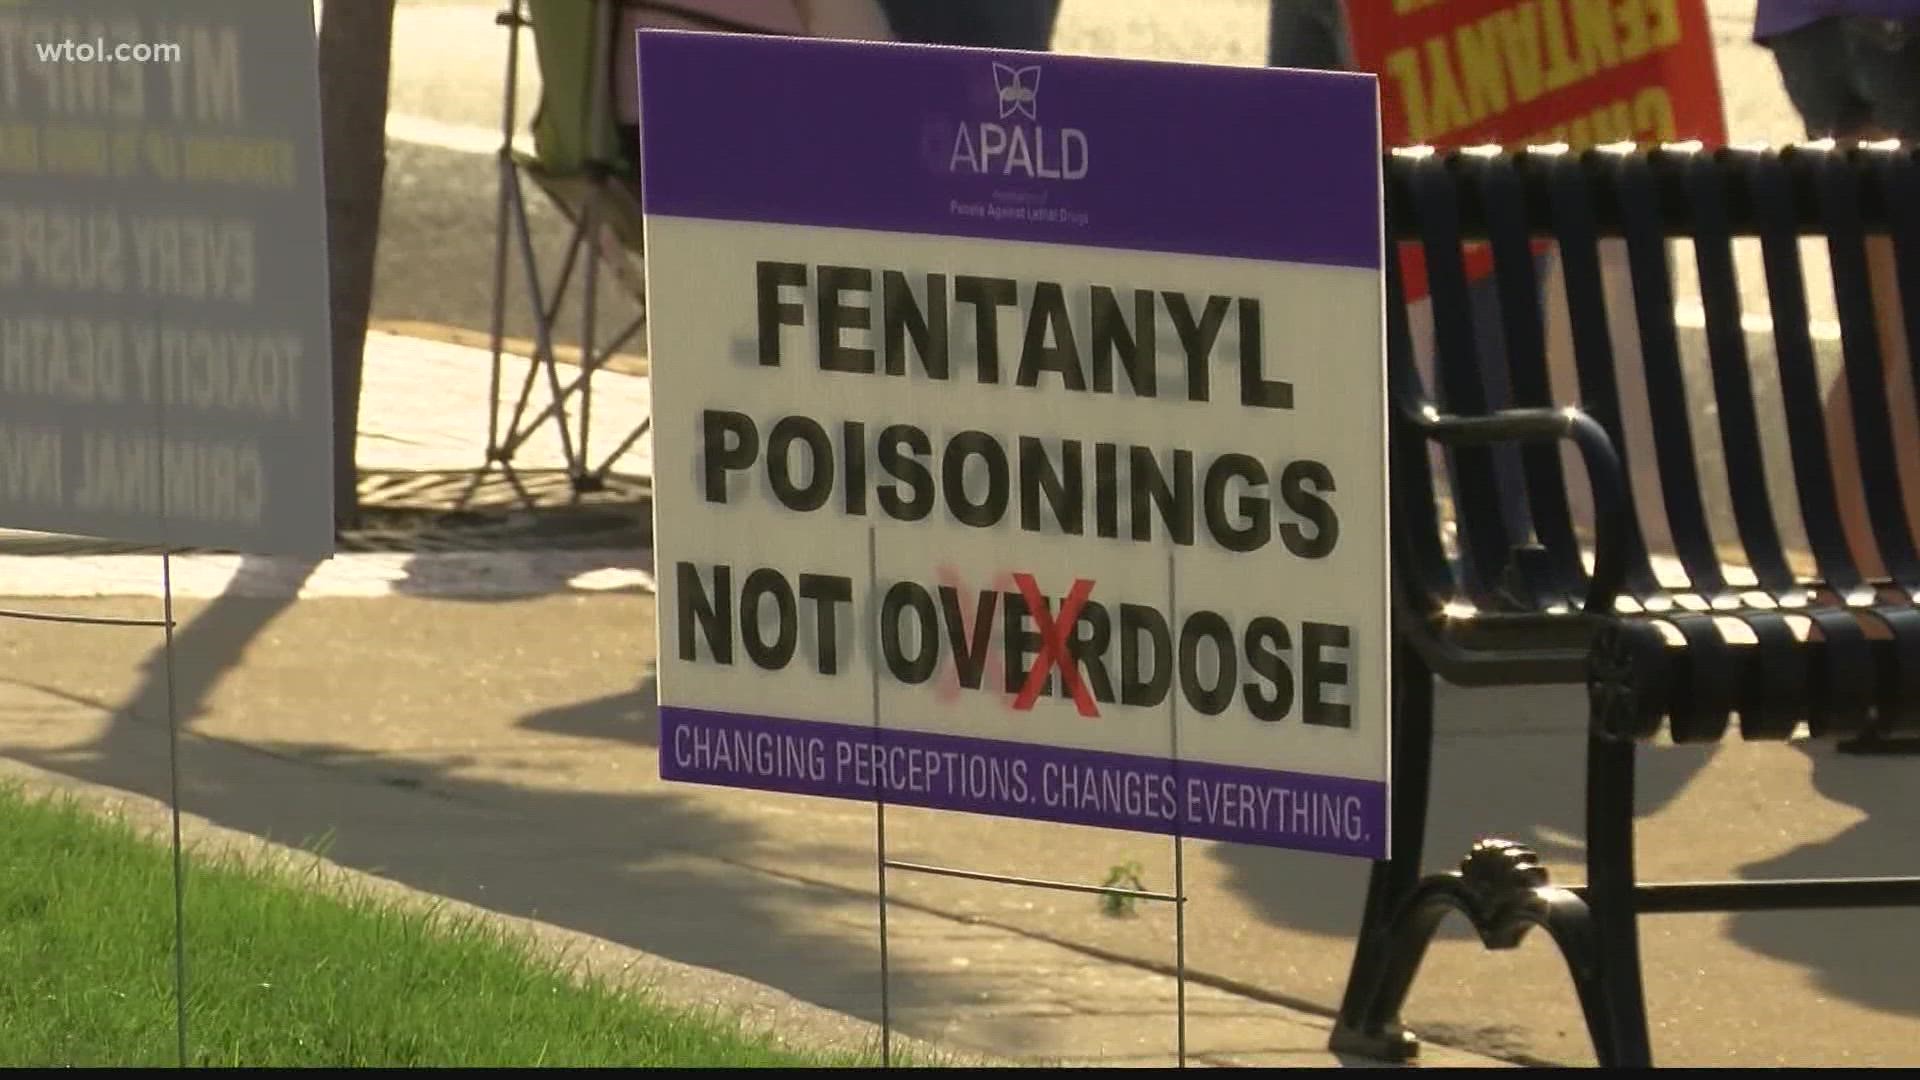 The Association of People Against Lethal Drugs advocates for education on the growing danger of fentanyl and calls for more accountability.